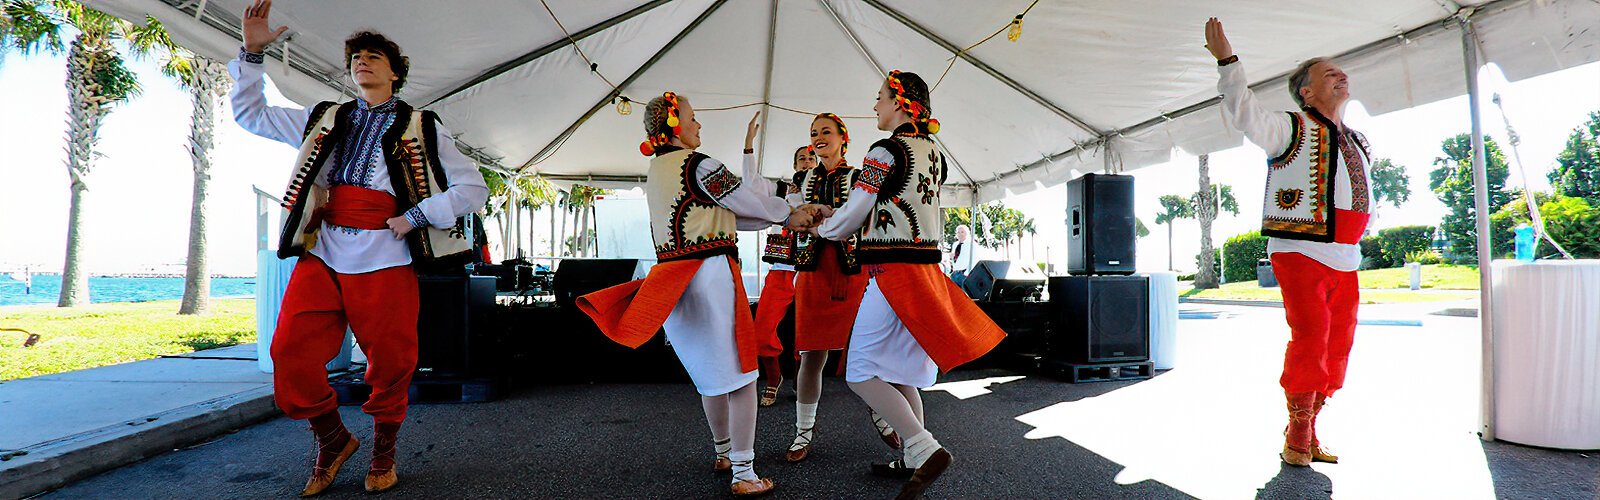  Ukrainians of the The Miami Dancers show off their heritage at the Saint Petersburg International Folk Fair Society (SPIFFS) 47th annual International Folk Fair at the Albert Whitted Park on Saturday, October 22nd.